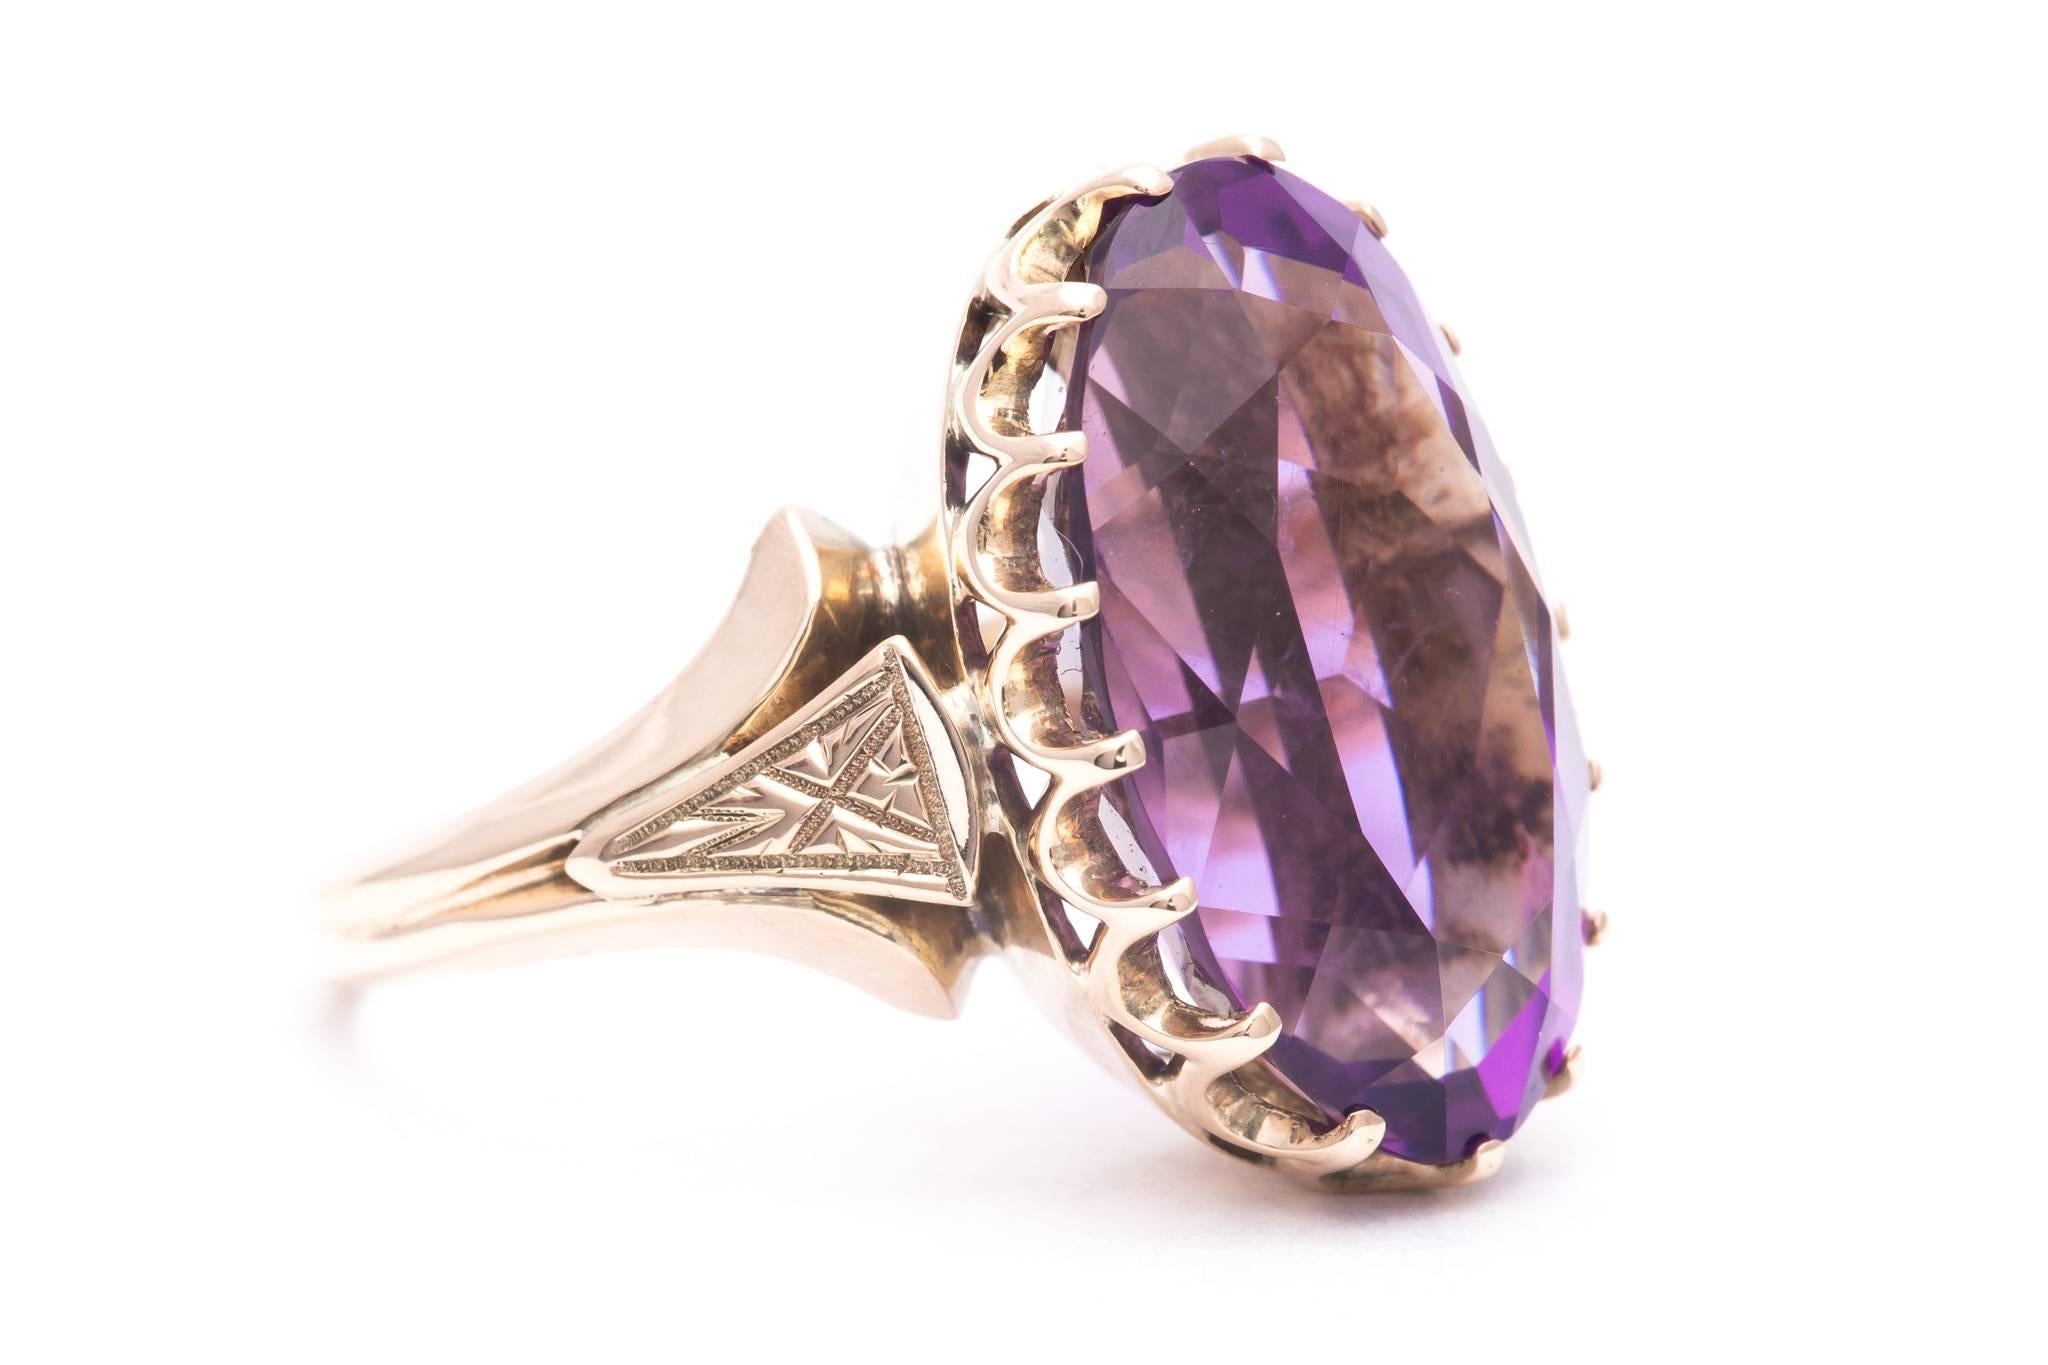 An original victorian period amethyst solitaire ring in 14 karat yellow gold.  Featuring a hand crafted crown like mounting with hand engraving on the shoulders; this ring is set with a single large oval cut amethyst solitaire.

Weighing 9.50 carats